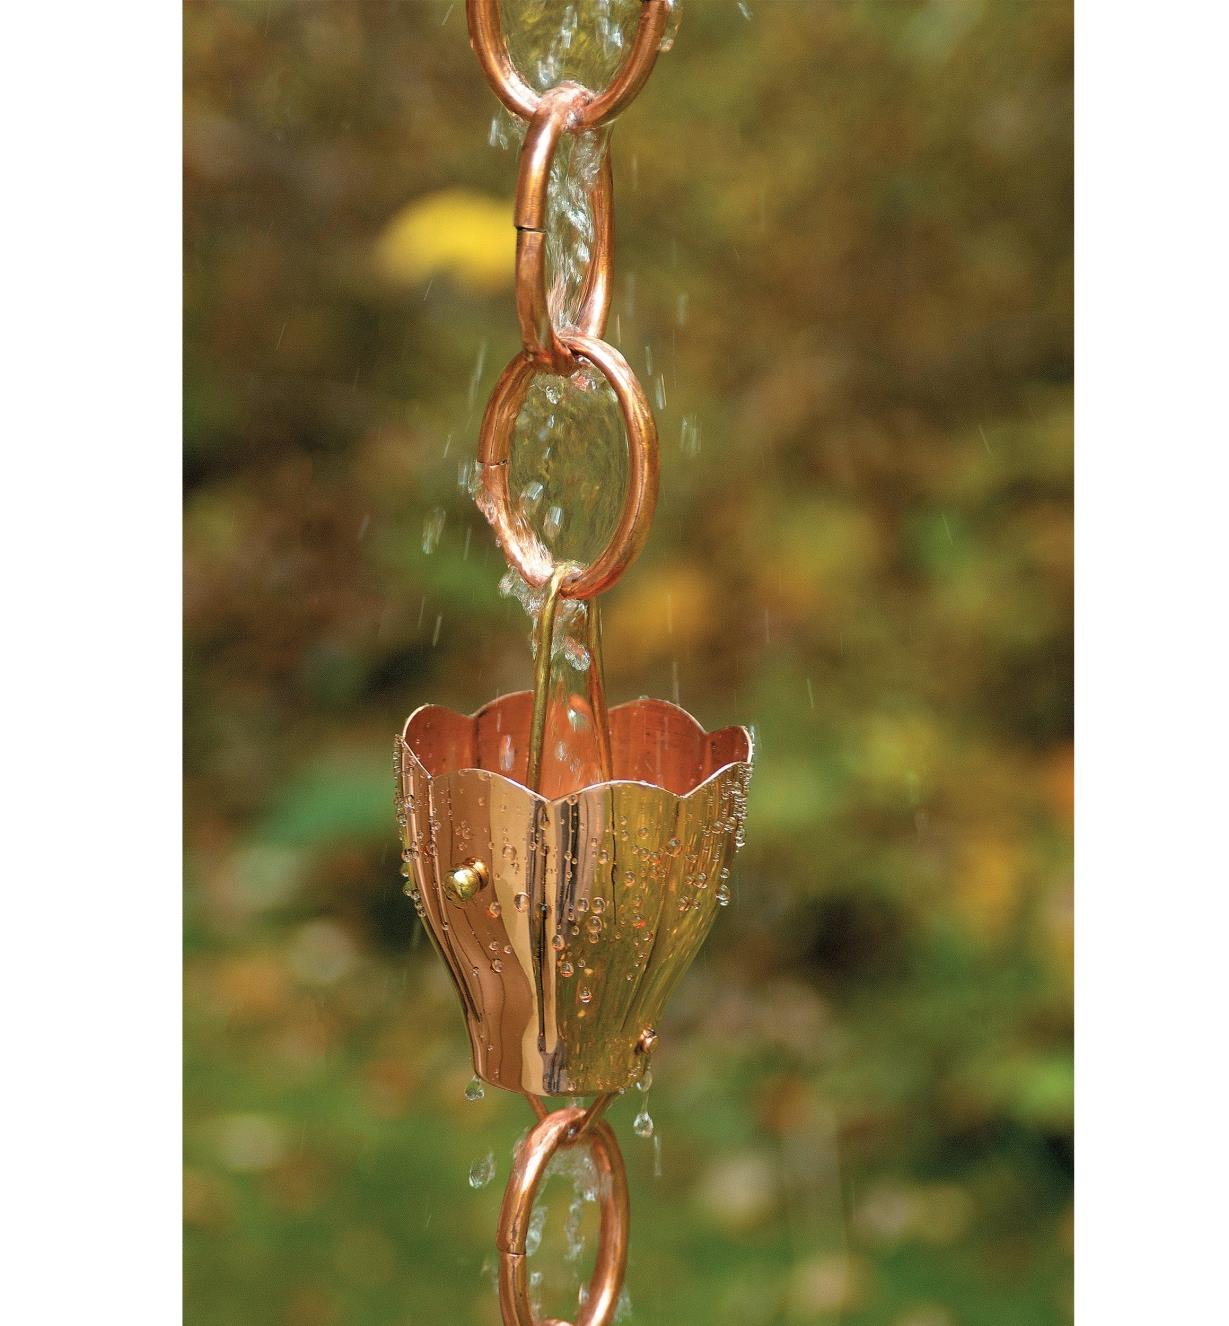 Water cascades through one of the fluted crocus-shaped funnels on the copper rain chain